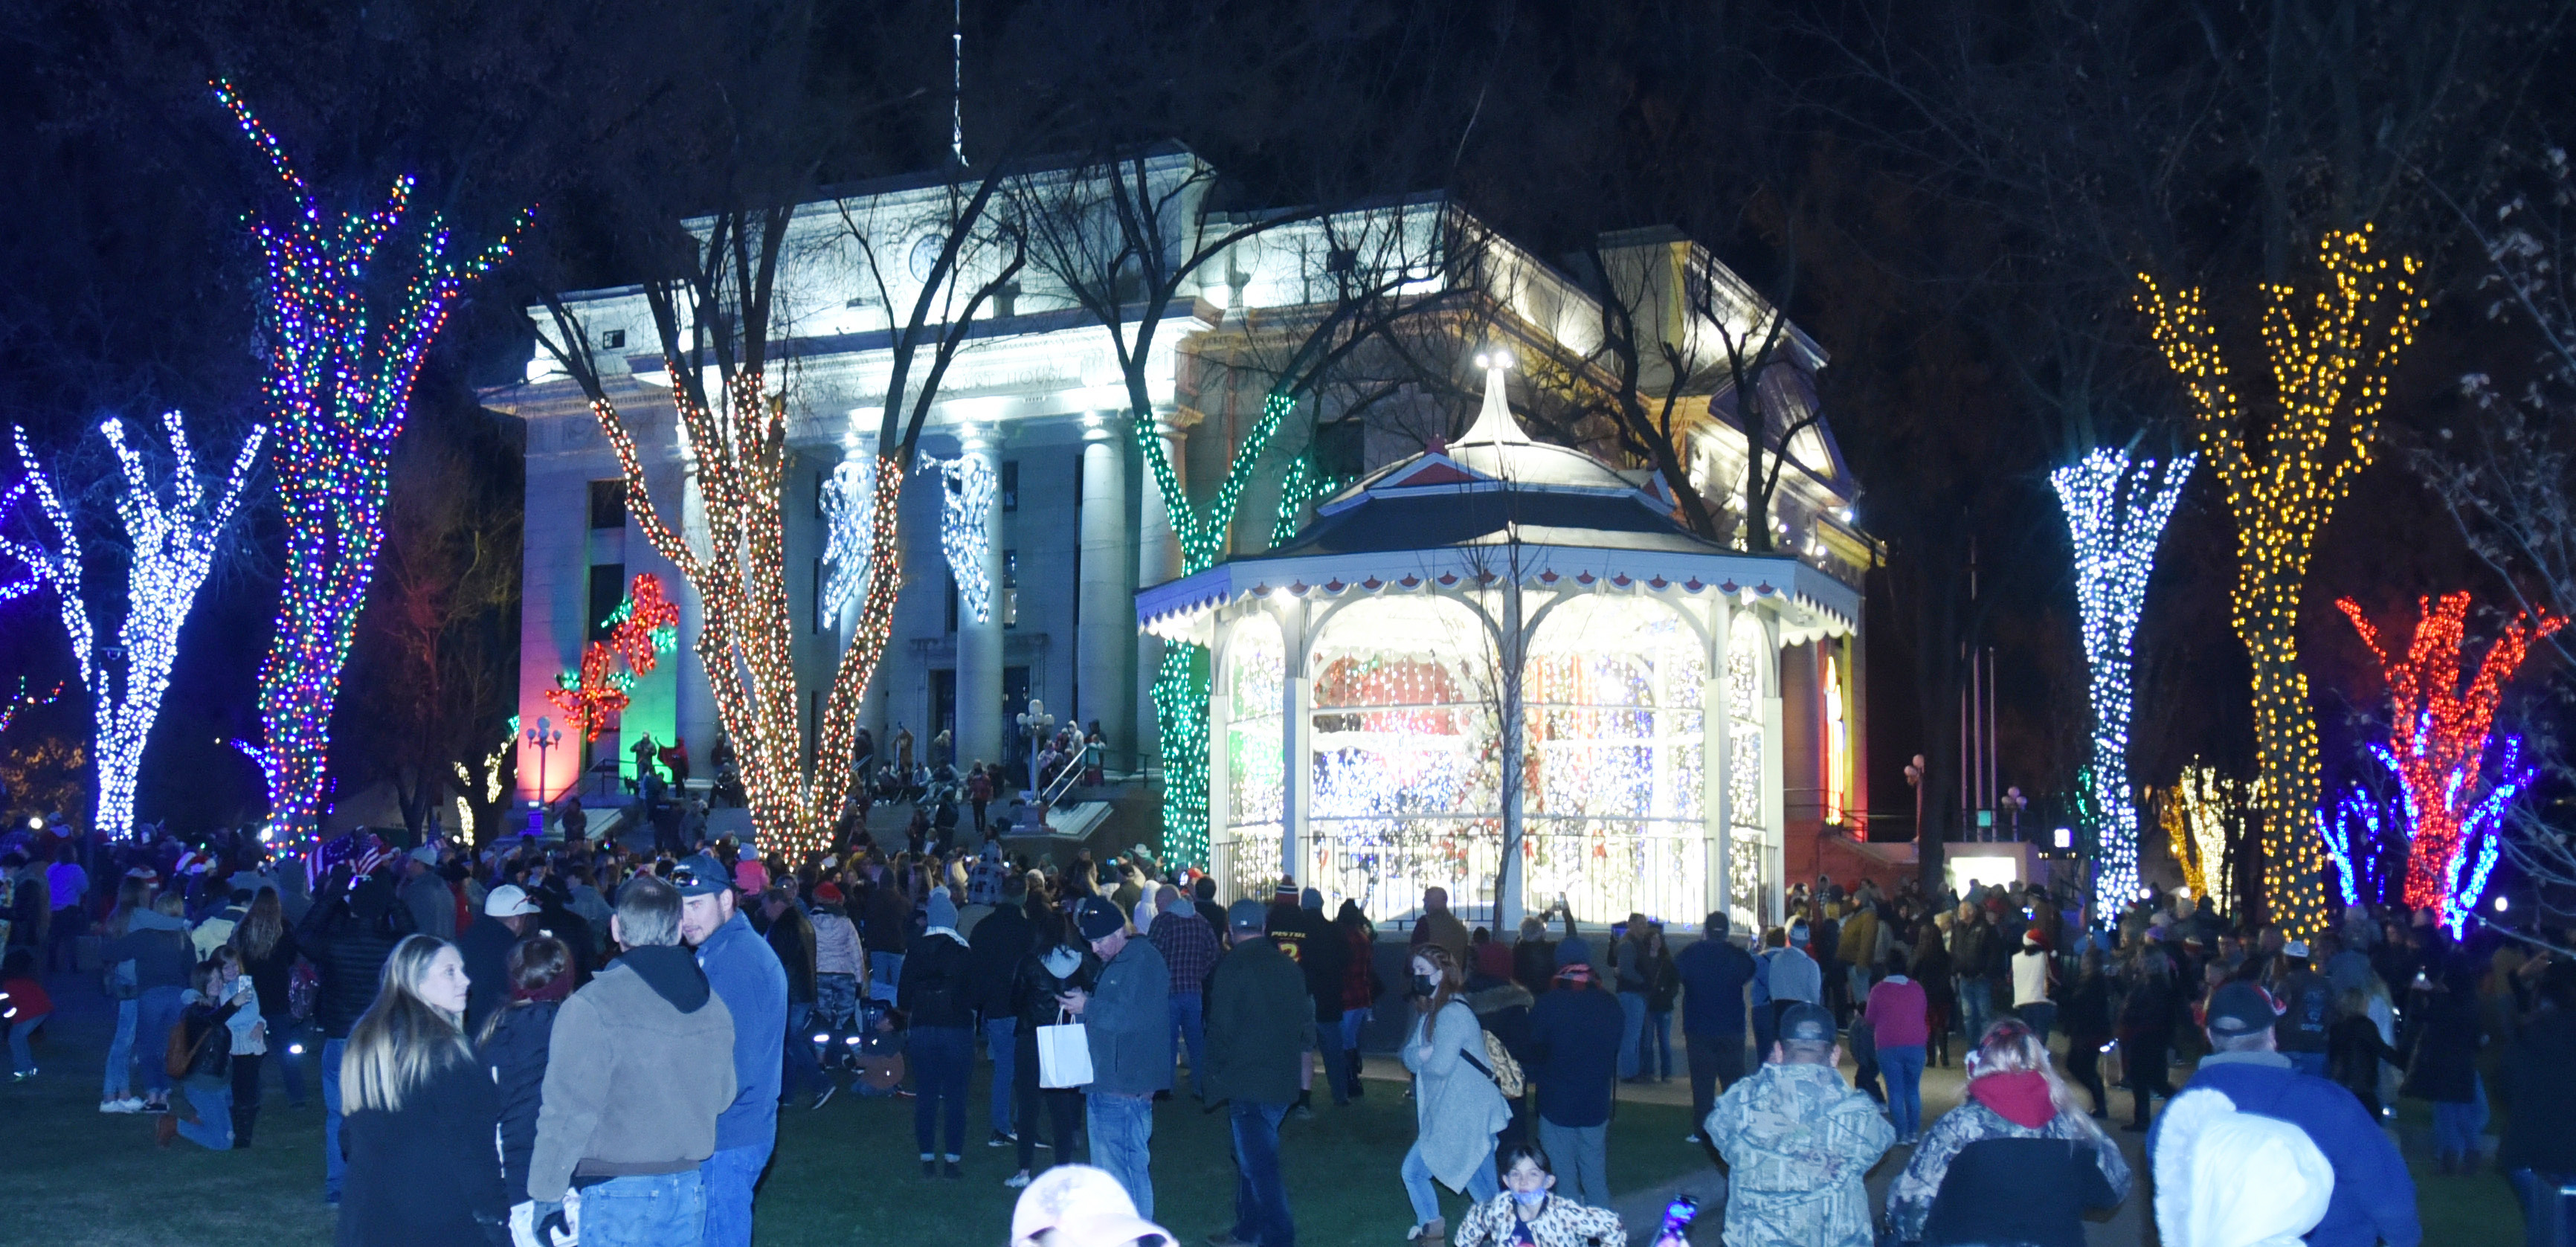 Prescott's 'virtual' Courthouse Lighting attracts hundreds to downtown